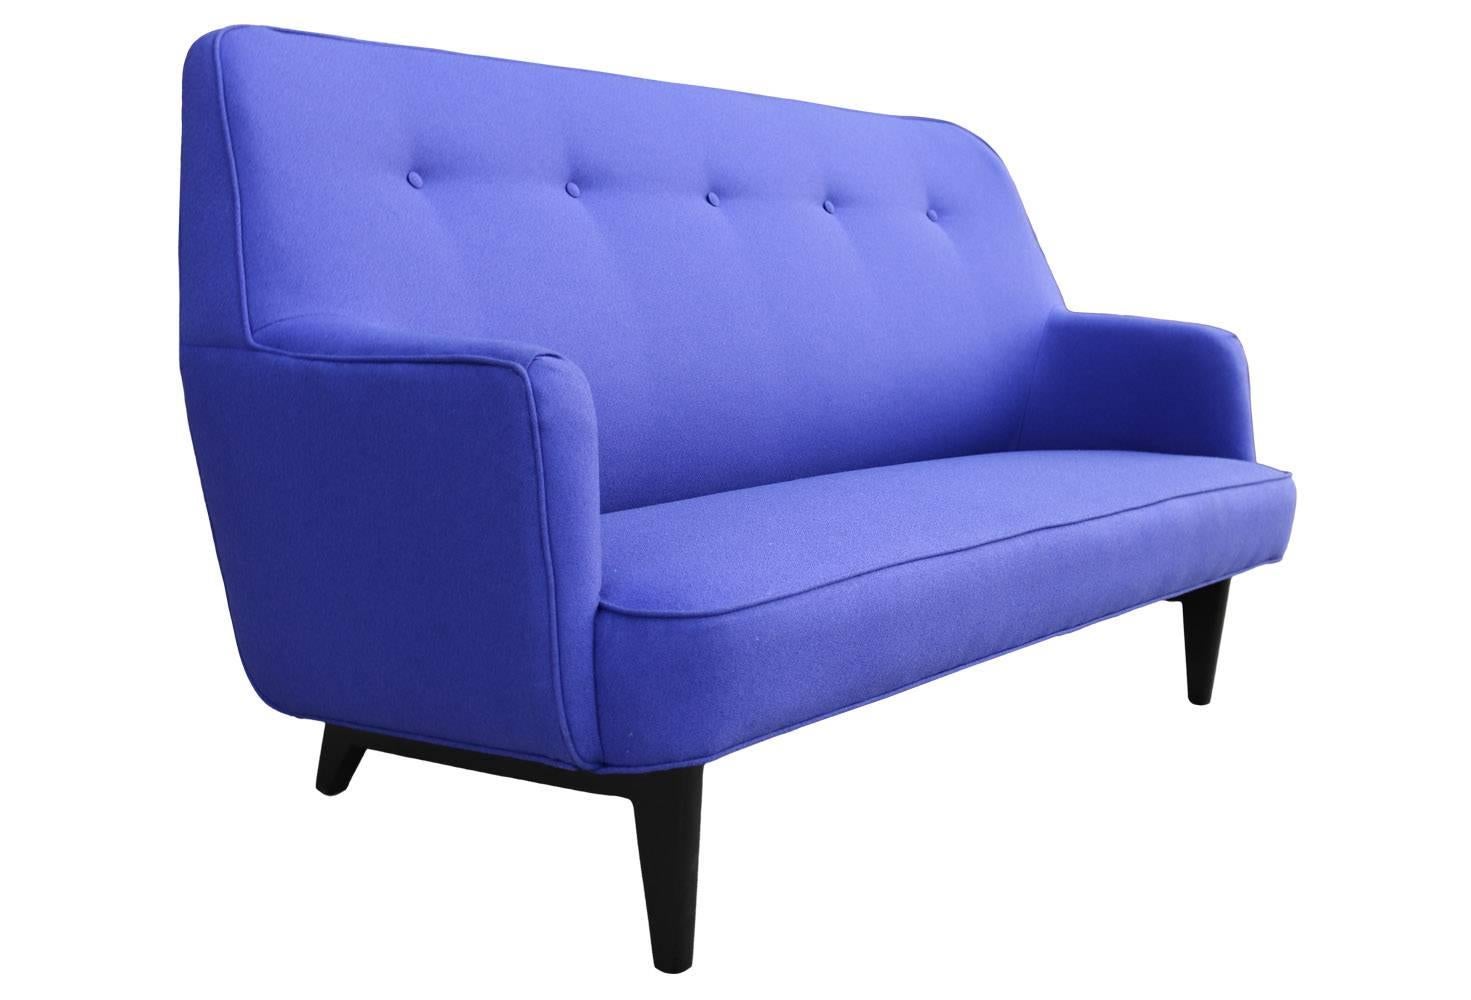 Its an amazing color, hard to put your finger on! Is it blue? Or purple? Either way, it is sure to make you smile! This vintage Mid-Century Modern sofa has been lovingly restored, new fabric and a fresh coat of black stain on the legs. It's perfect.